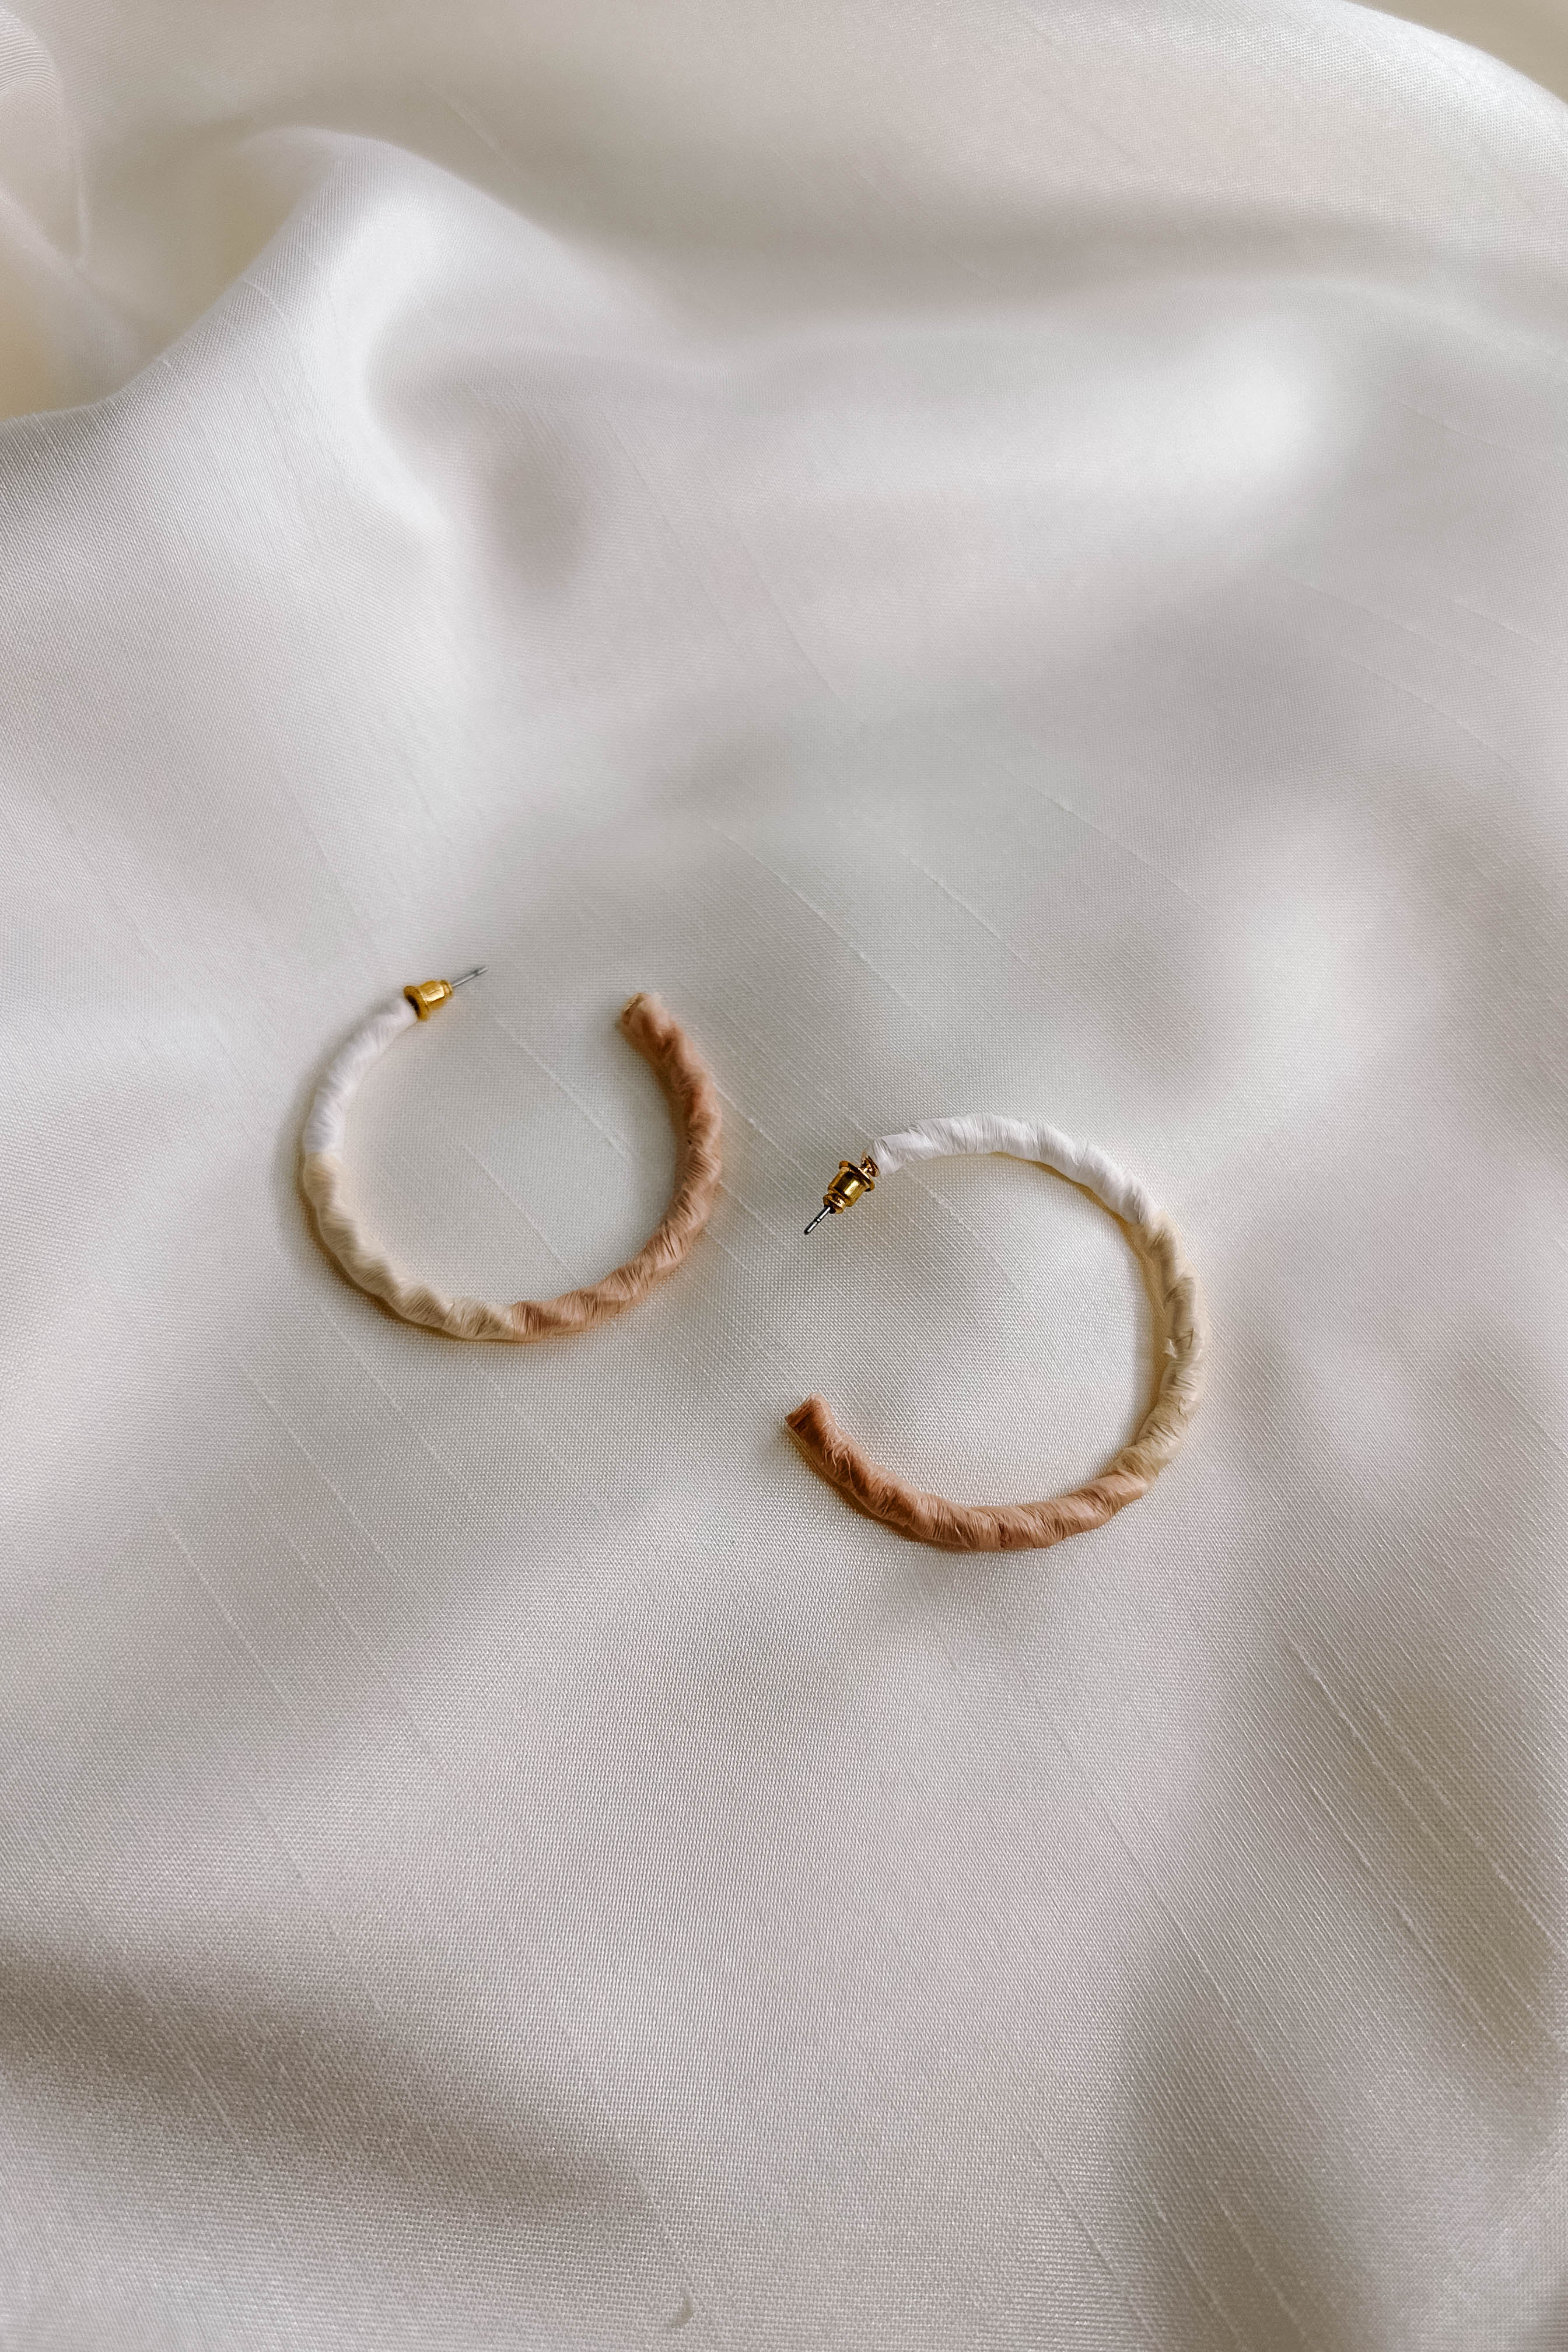 Side view of the Summer Breeze Earrings which features open, large hoops wrapped in white, beige and cream paper, shown on cream fabric.